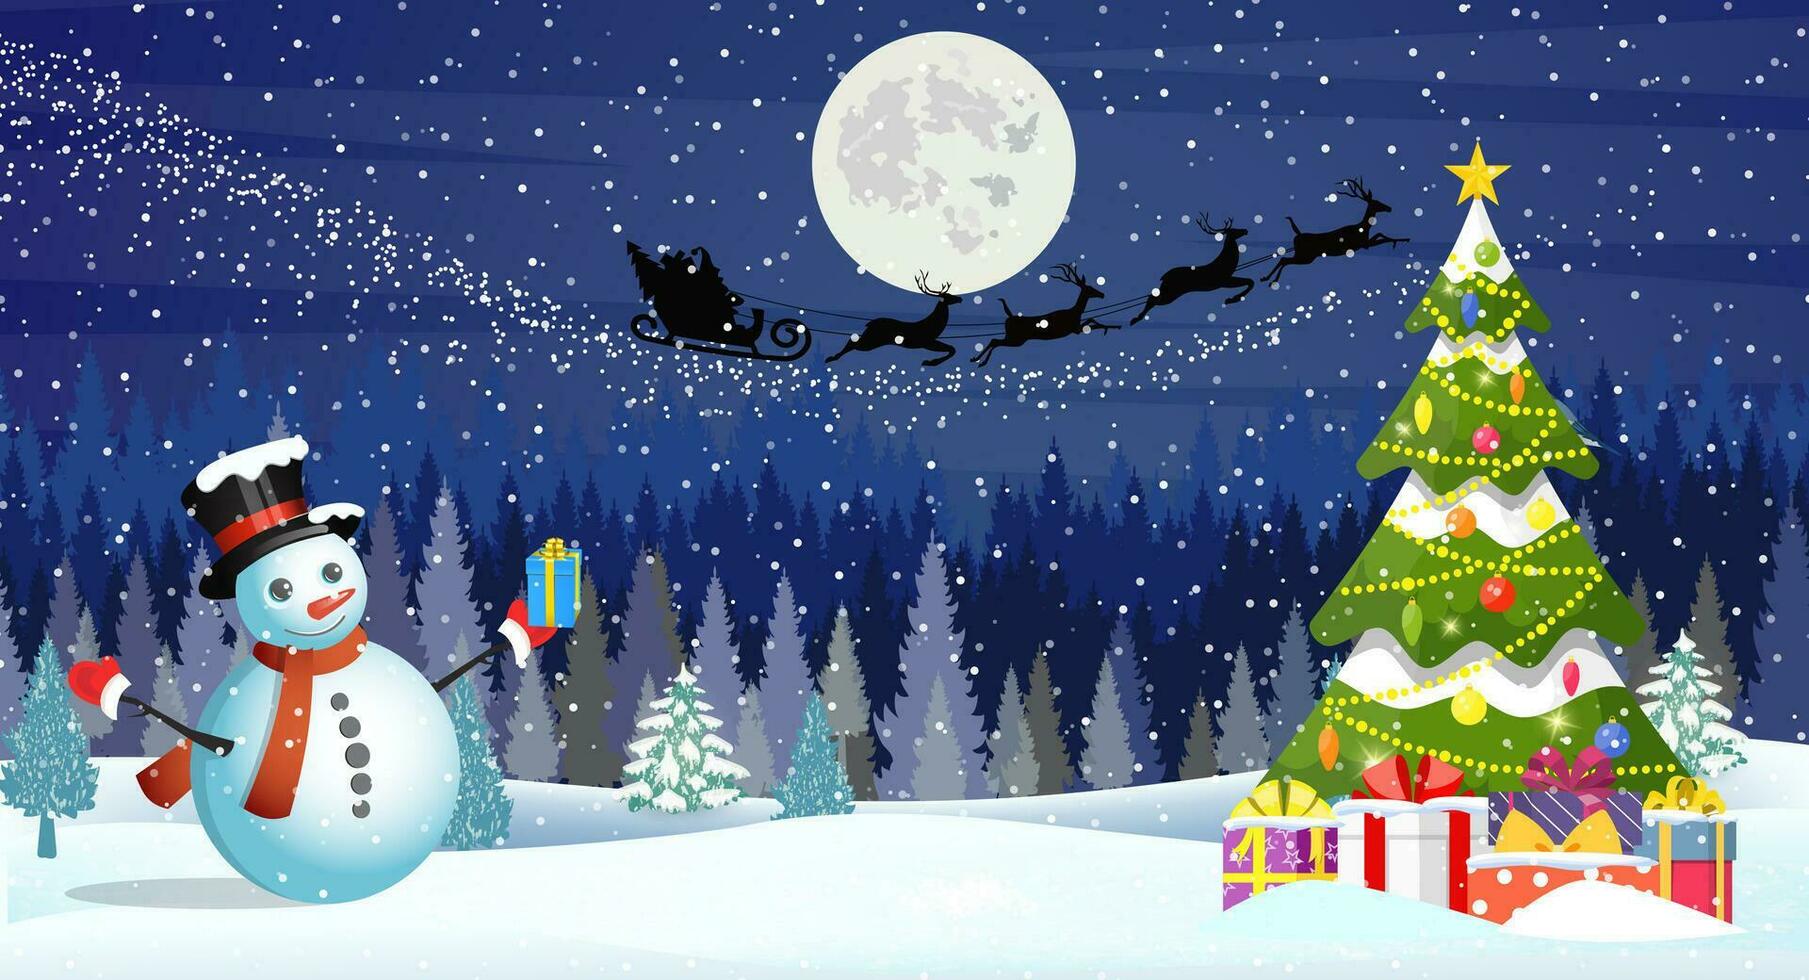 Christmas landscape at night. christmas tree and snowman. background with moon and the silhouette of Santa Claus flying on a sleigh. concept for greeting or postal card vector